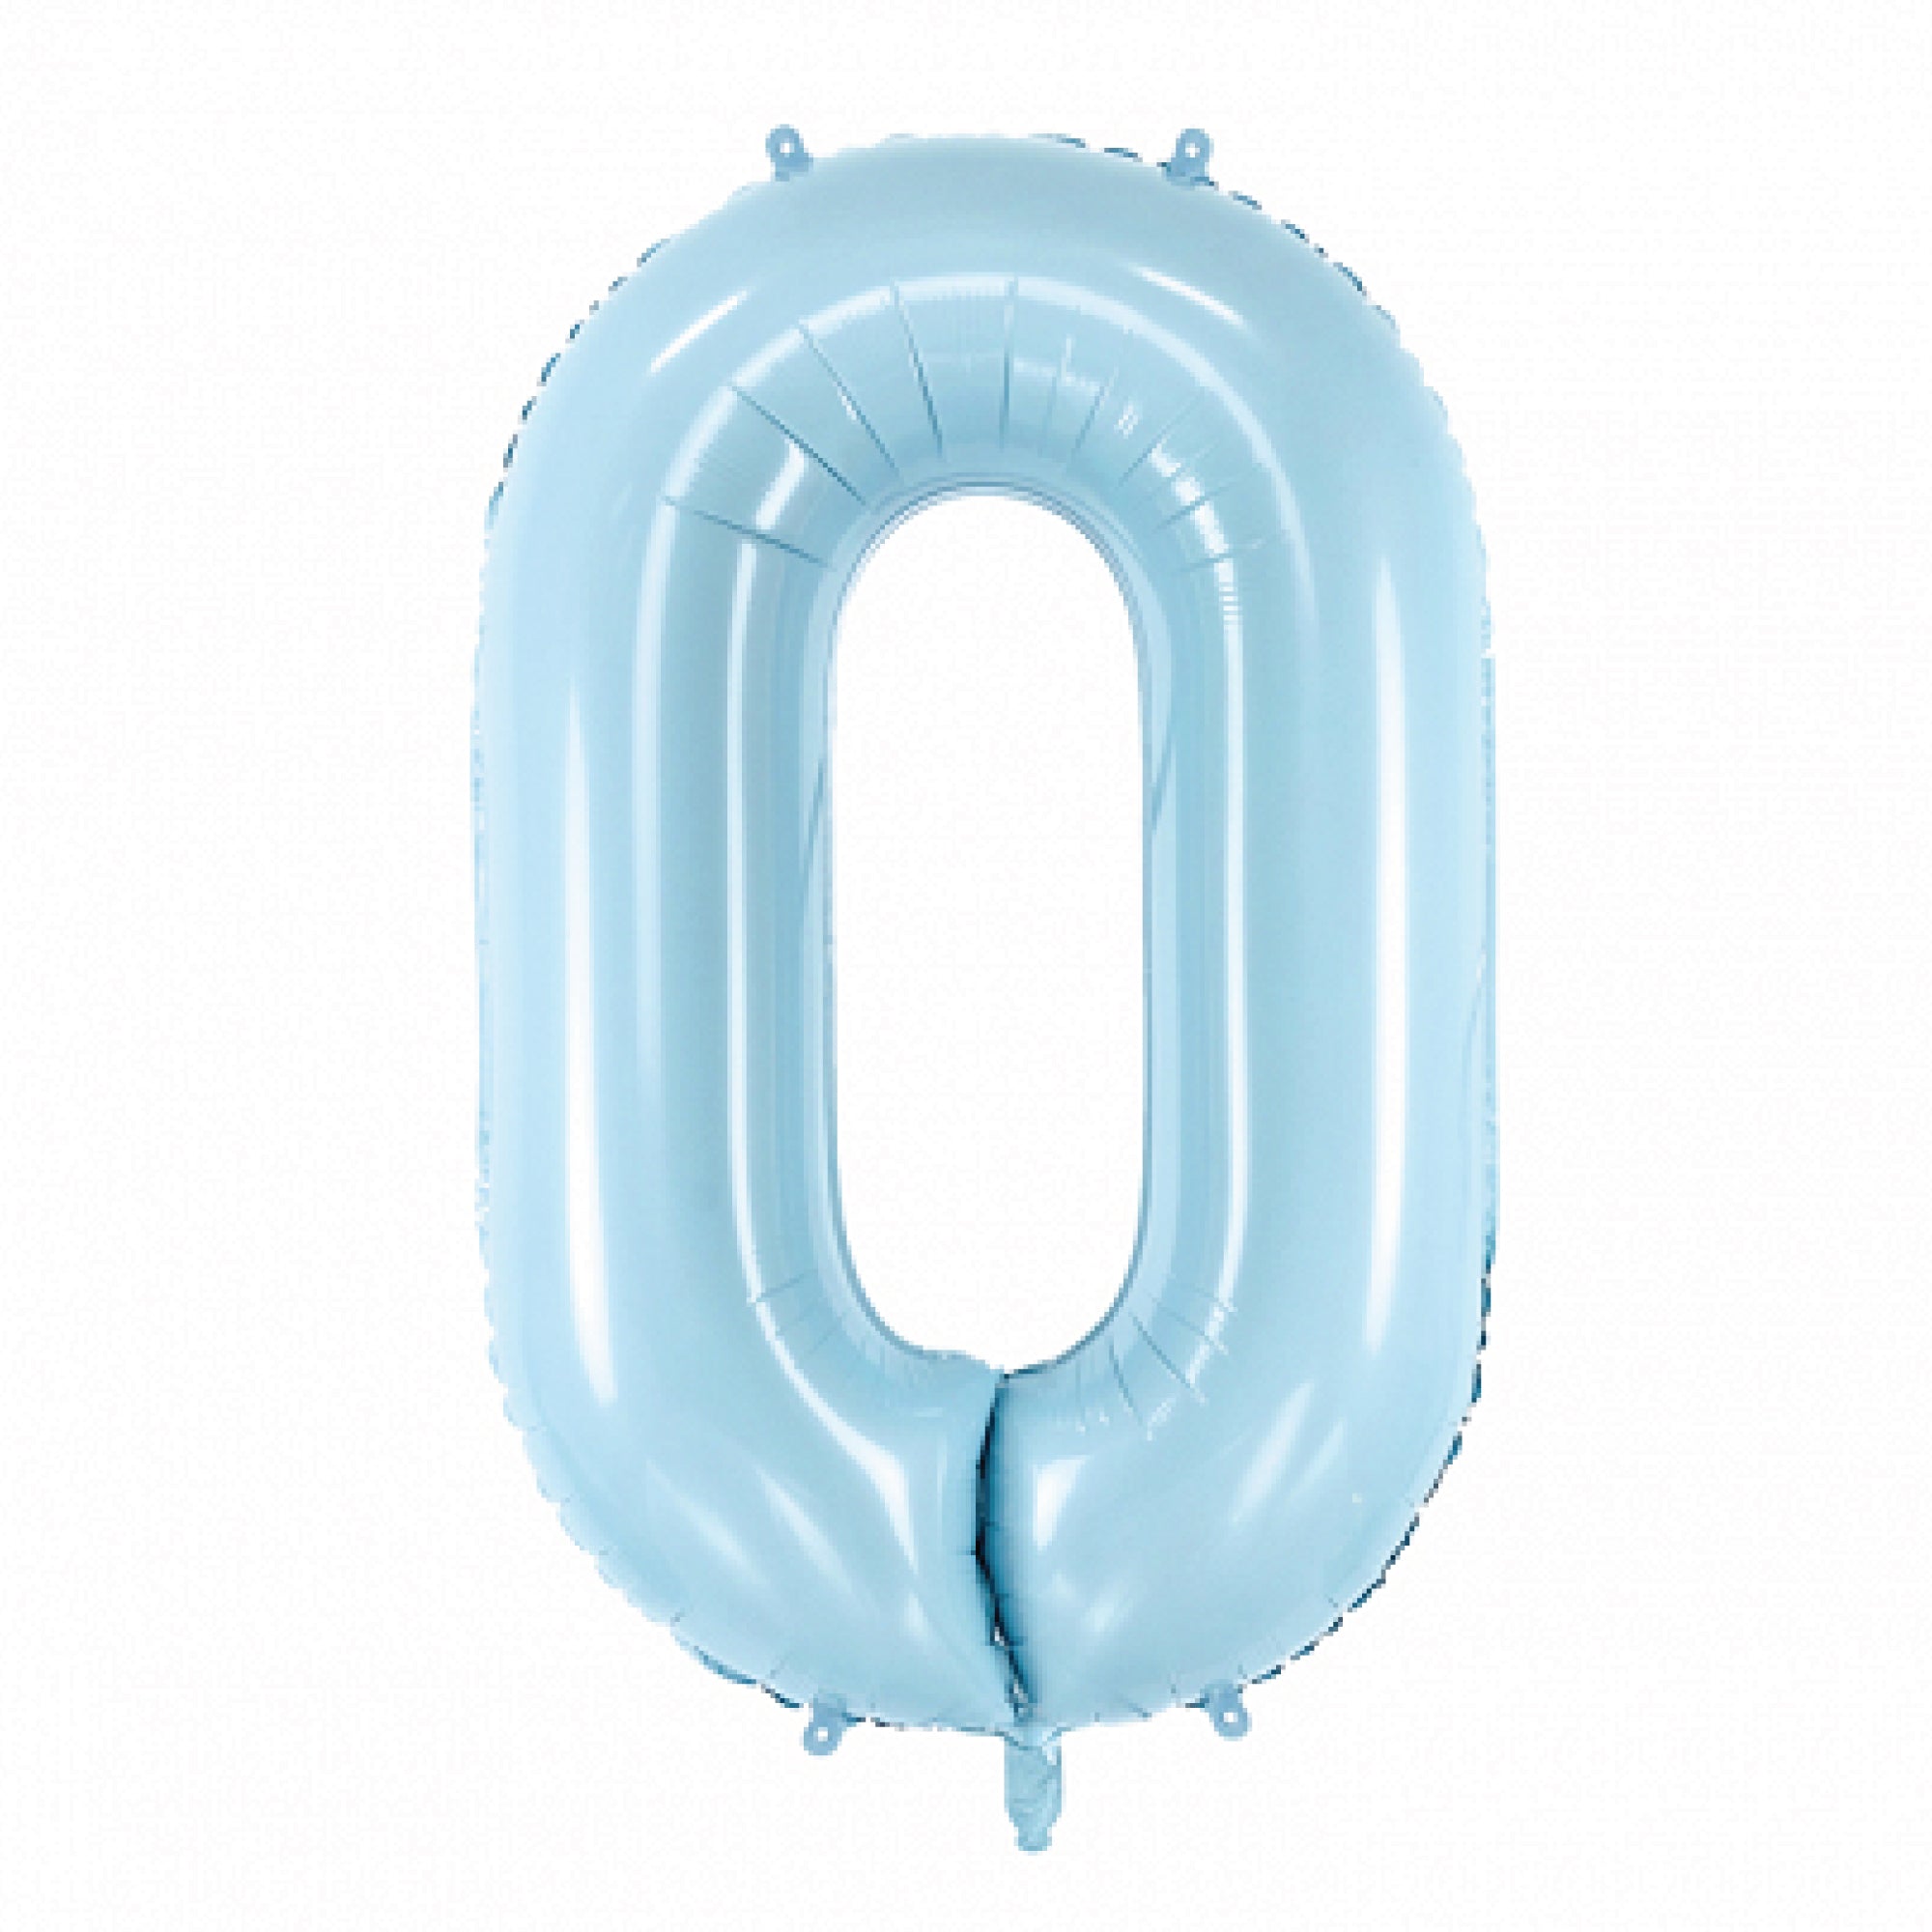 34" Pastel Light Blue Giant Number Balloon 0-9 | The Party Darling